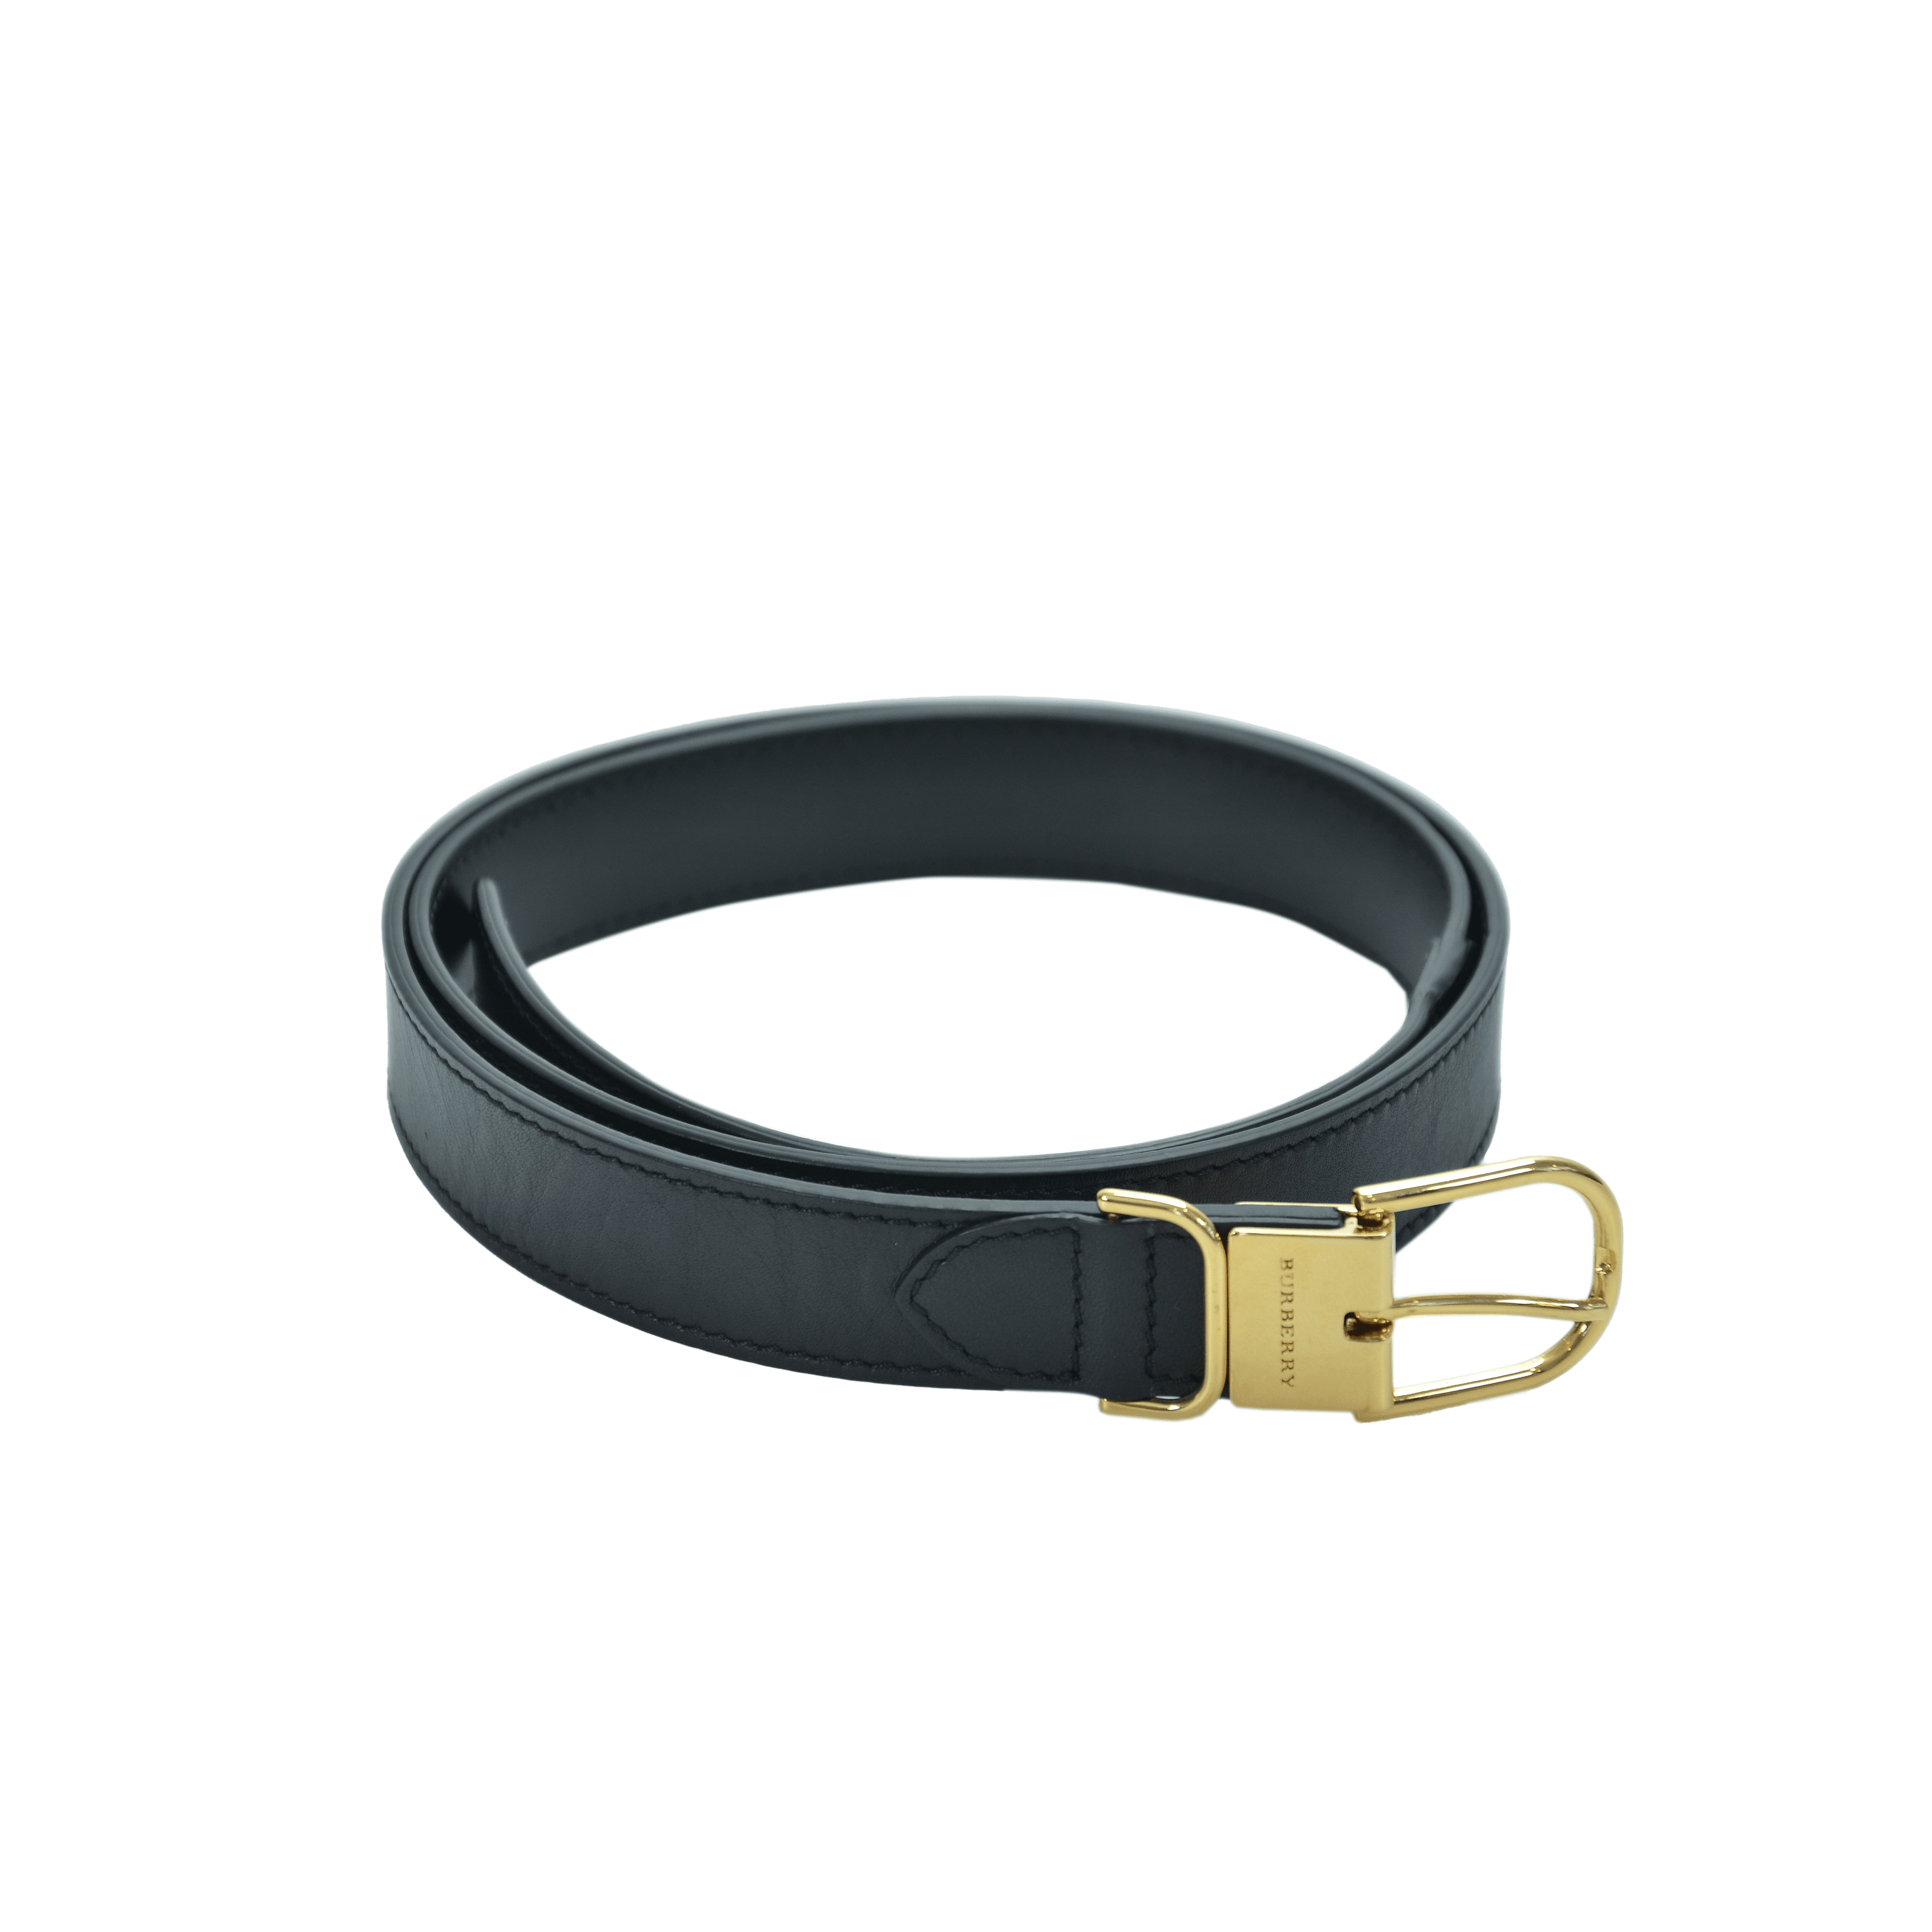 Burberry Black Leather Belt With Gold Buckle